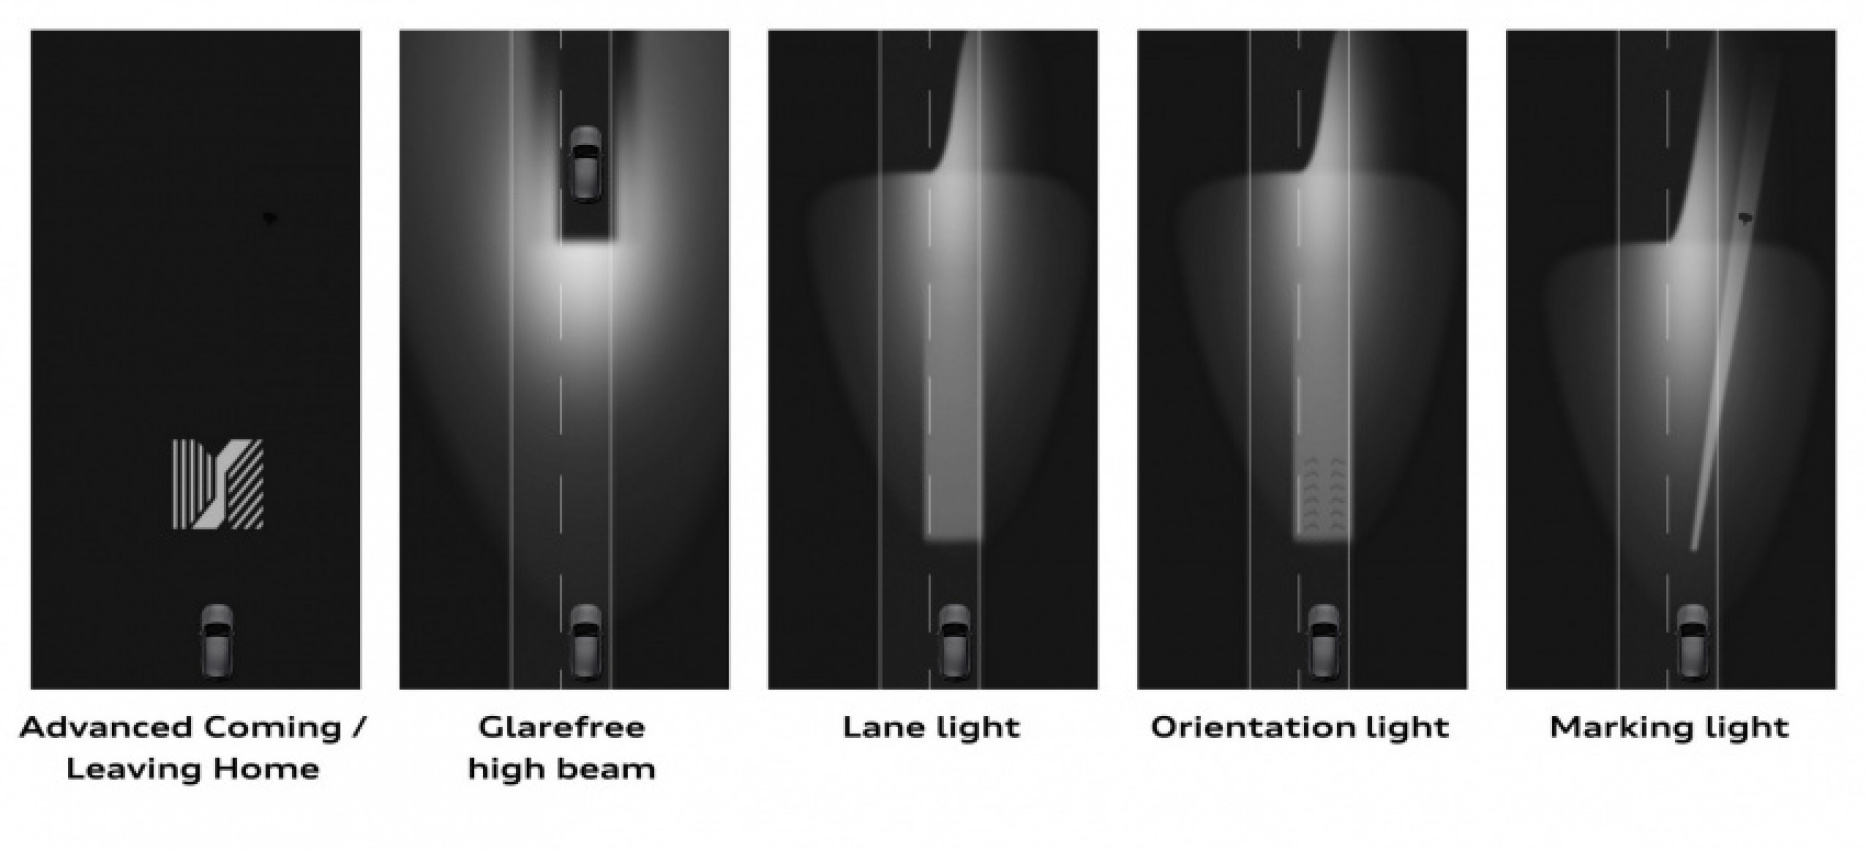 autos, cars, news, toyota, nhtsa, reports, tech, u.s. finally allowing adaptive headlights, eight years after toyota’s petition